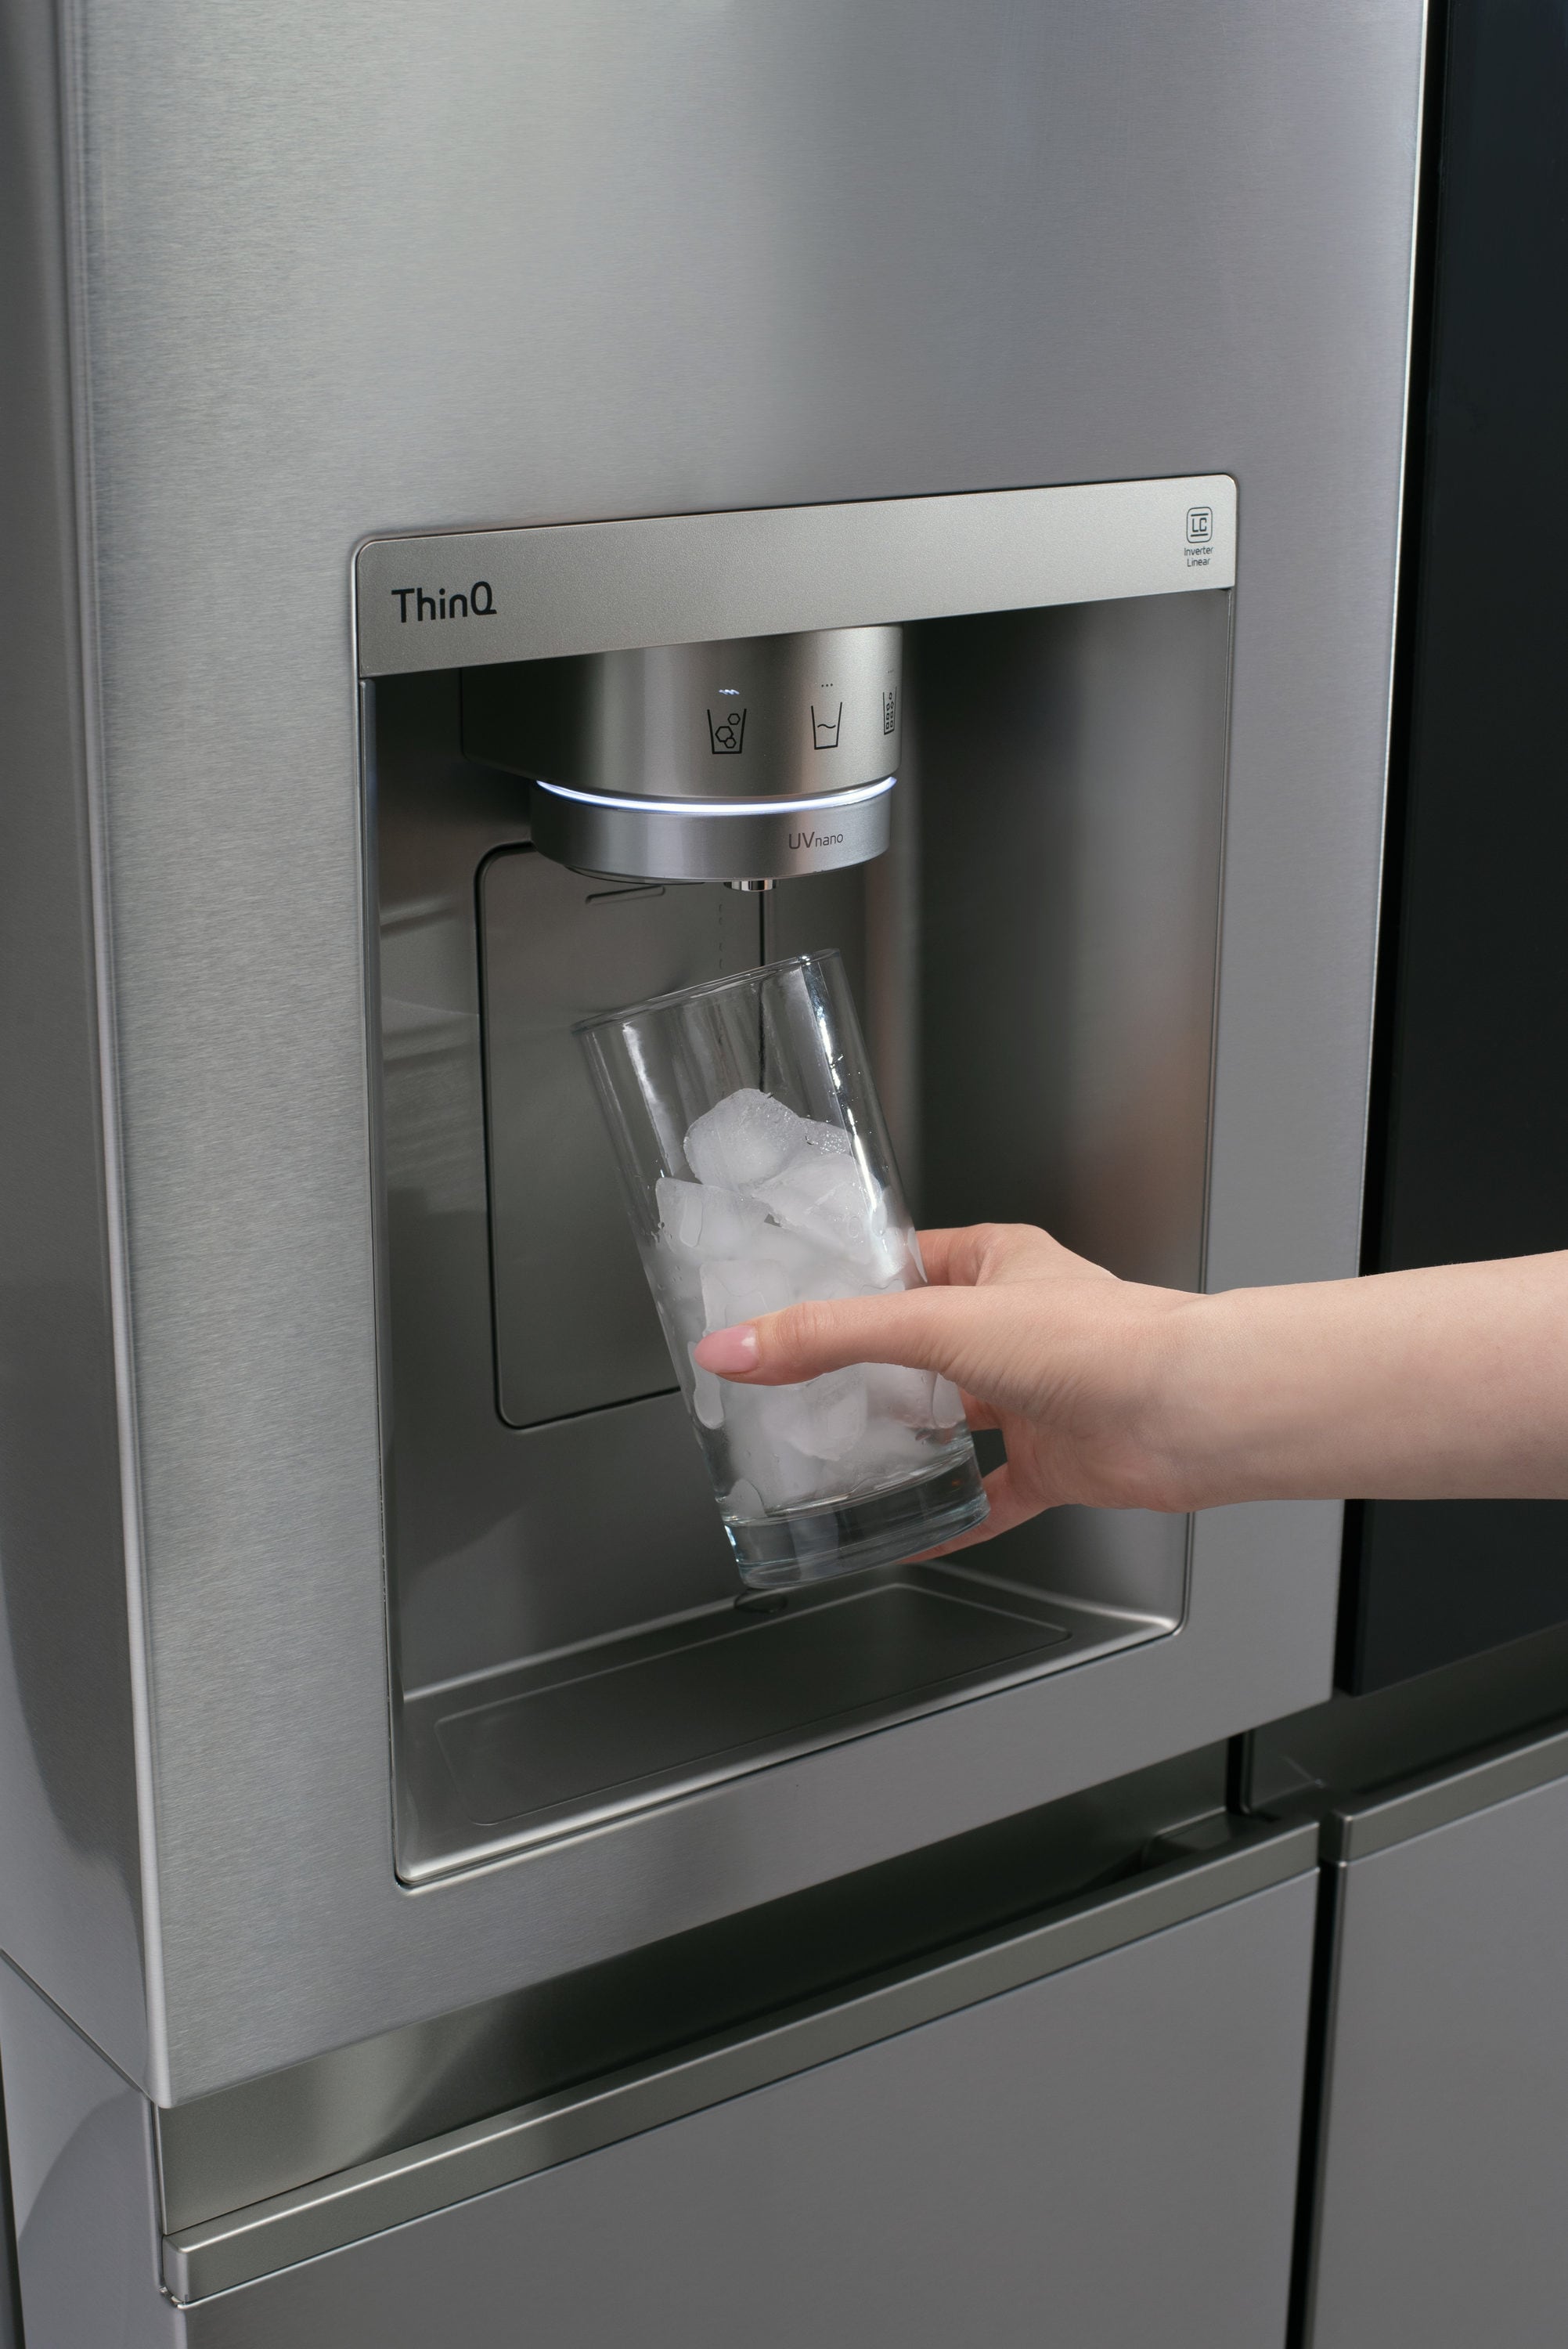 LG Smart InstaView Refrigerator Features Voice Control, webOS and Remote  Viewing Capabilities